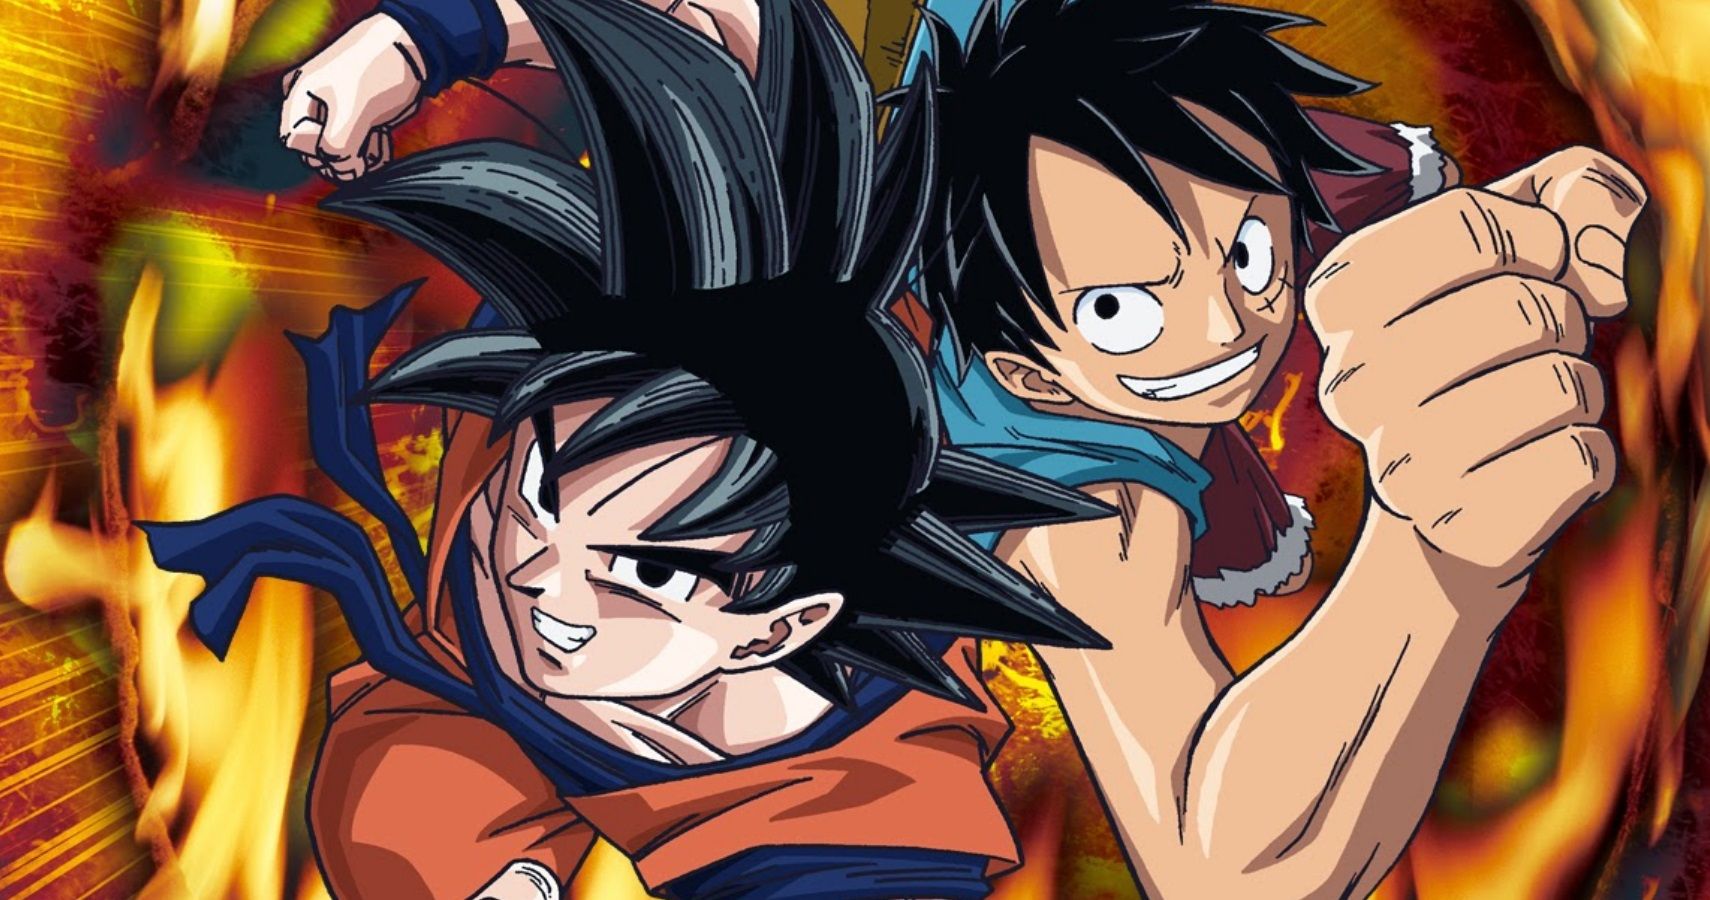 The 5 Most Popular Shonen Anime In Japan (& The 5 Most Popular In The West)